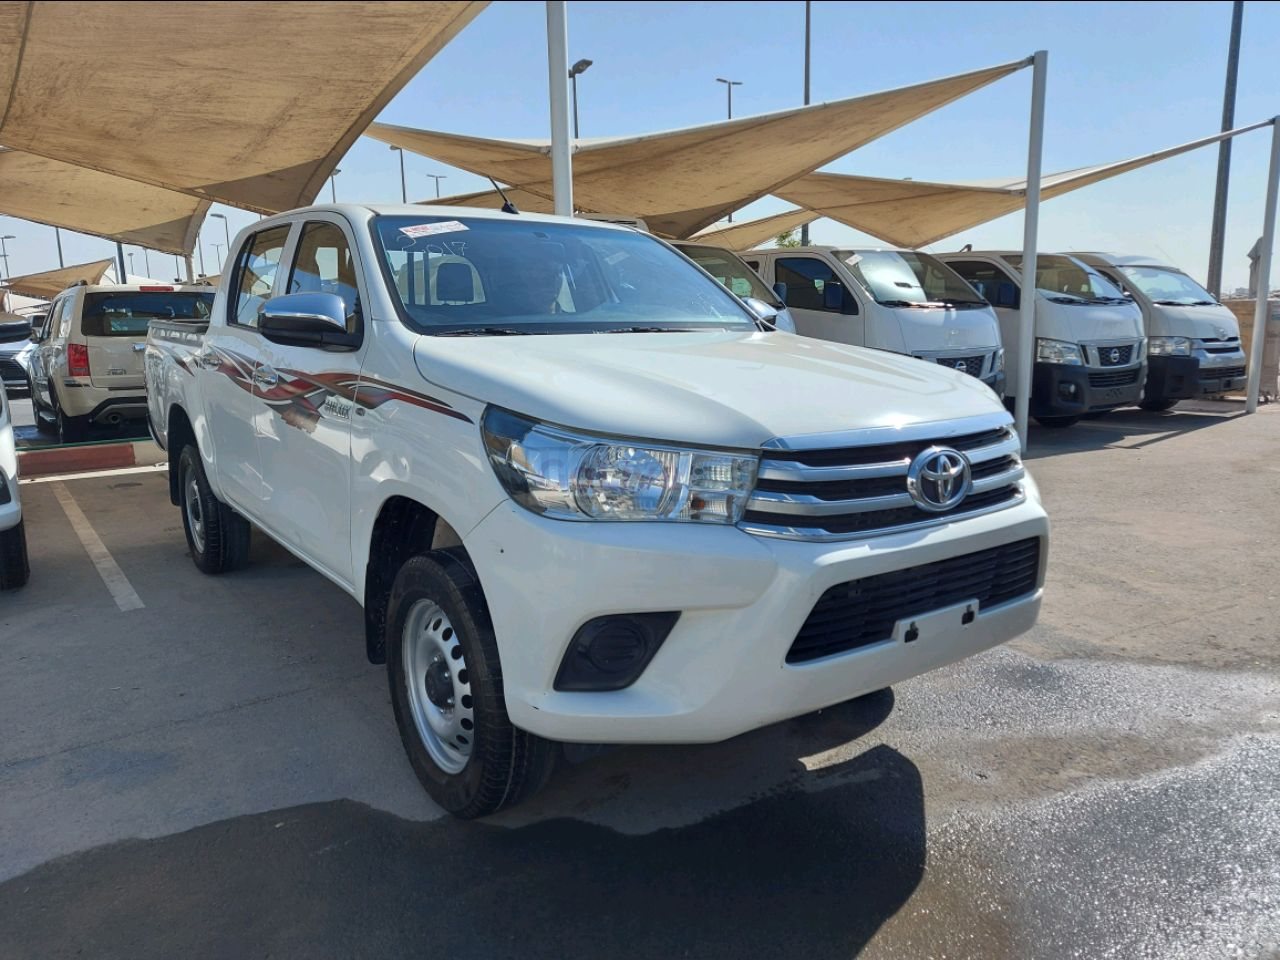 Toyota Hilux 2017 AED 68,000, Good condition, Full Option, Fog Lights, Negotiable